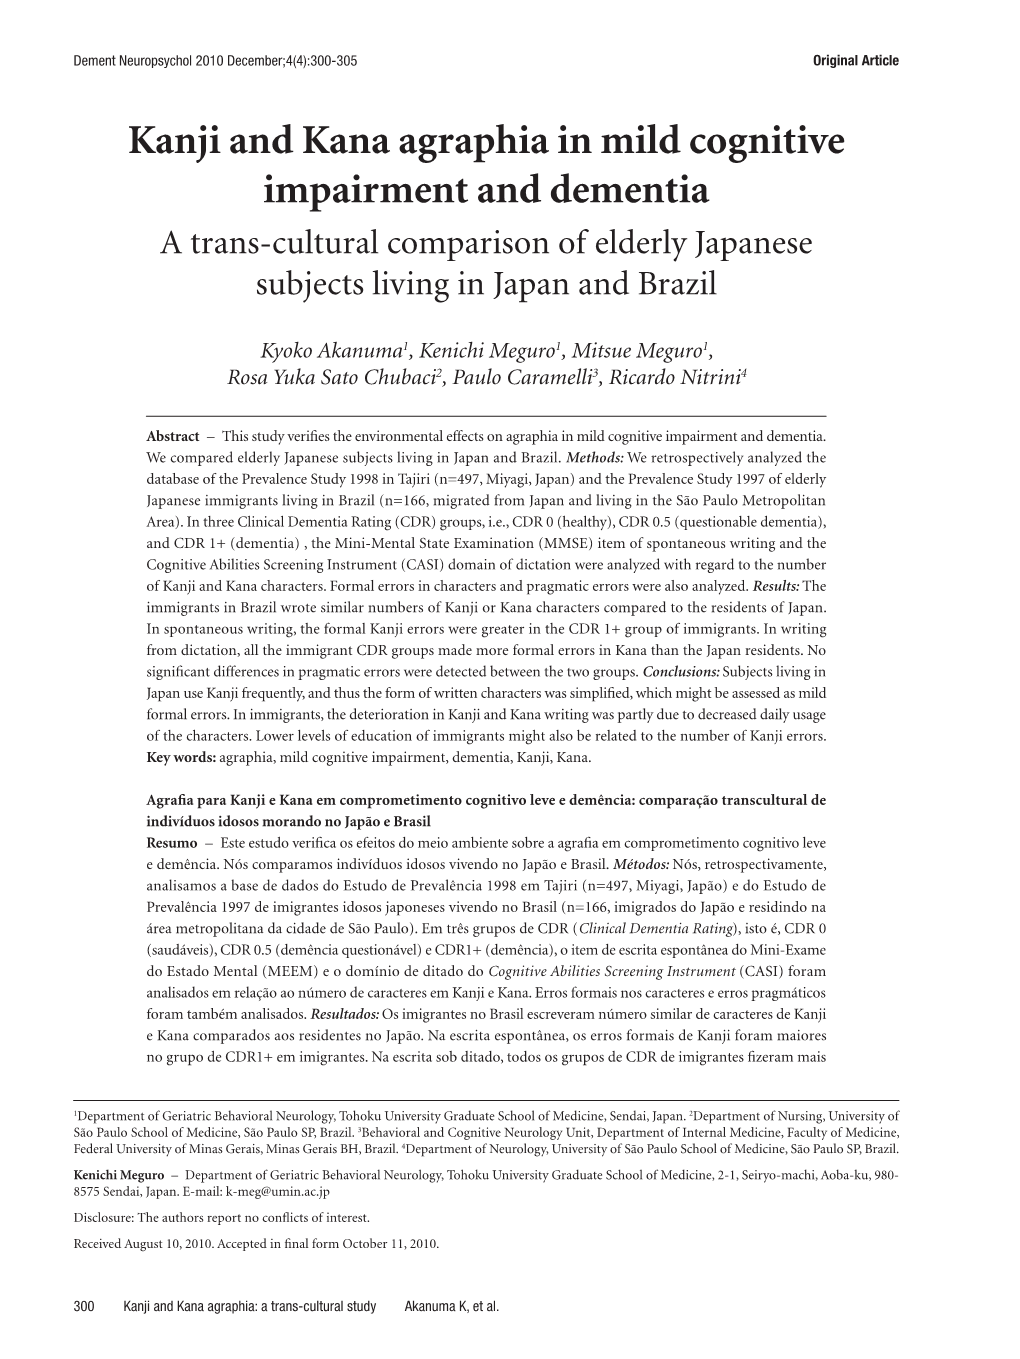 Kanji and Kana Agraphia in Mild Cognitive Impairment and Dementia a Trans-Cultural Comparison of Elderly Japanese Subjects Living in Japan and Brazil